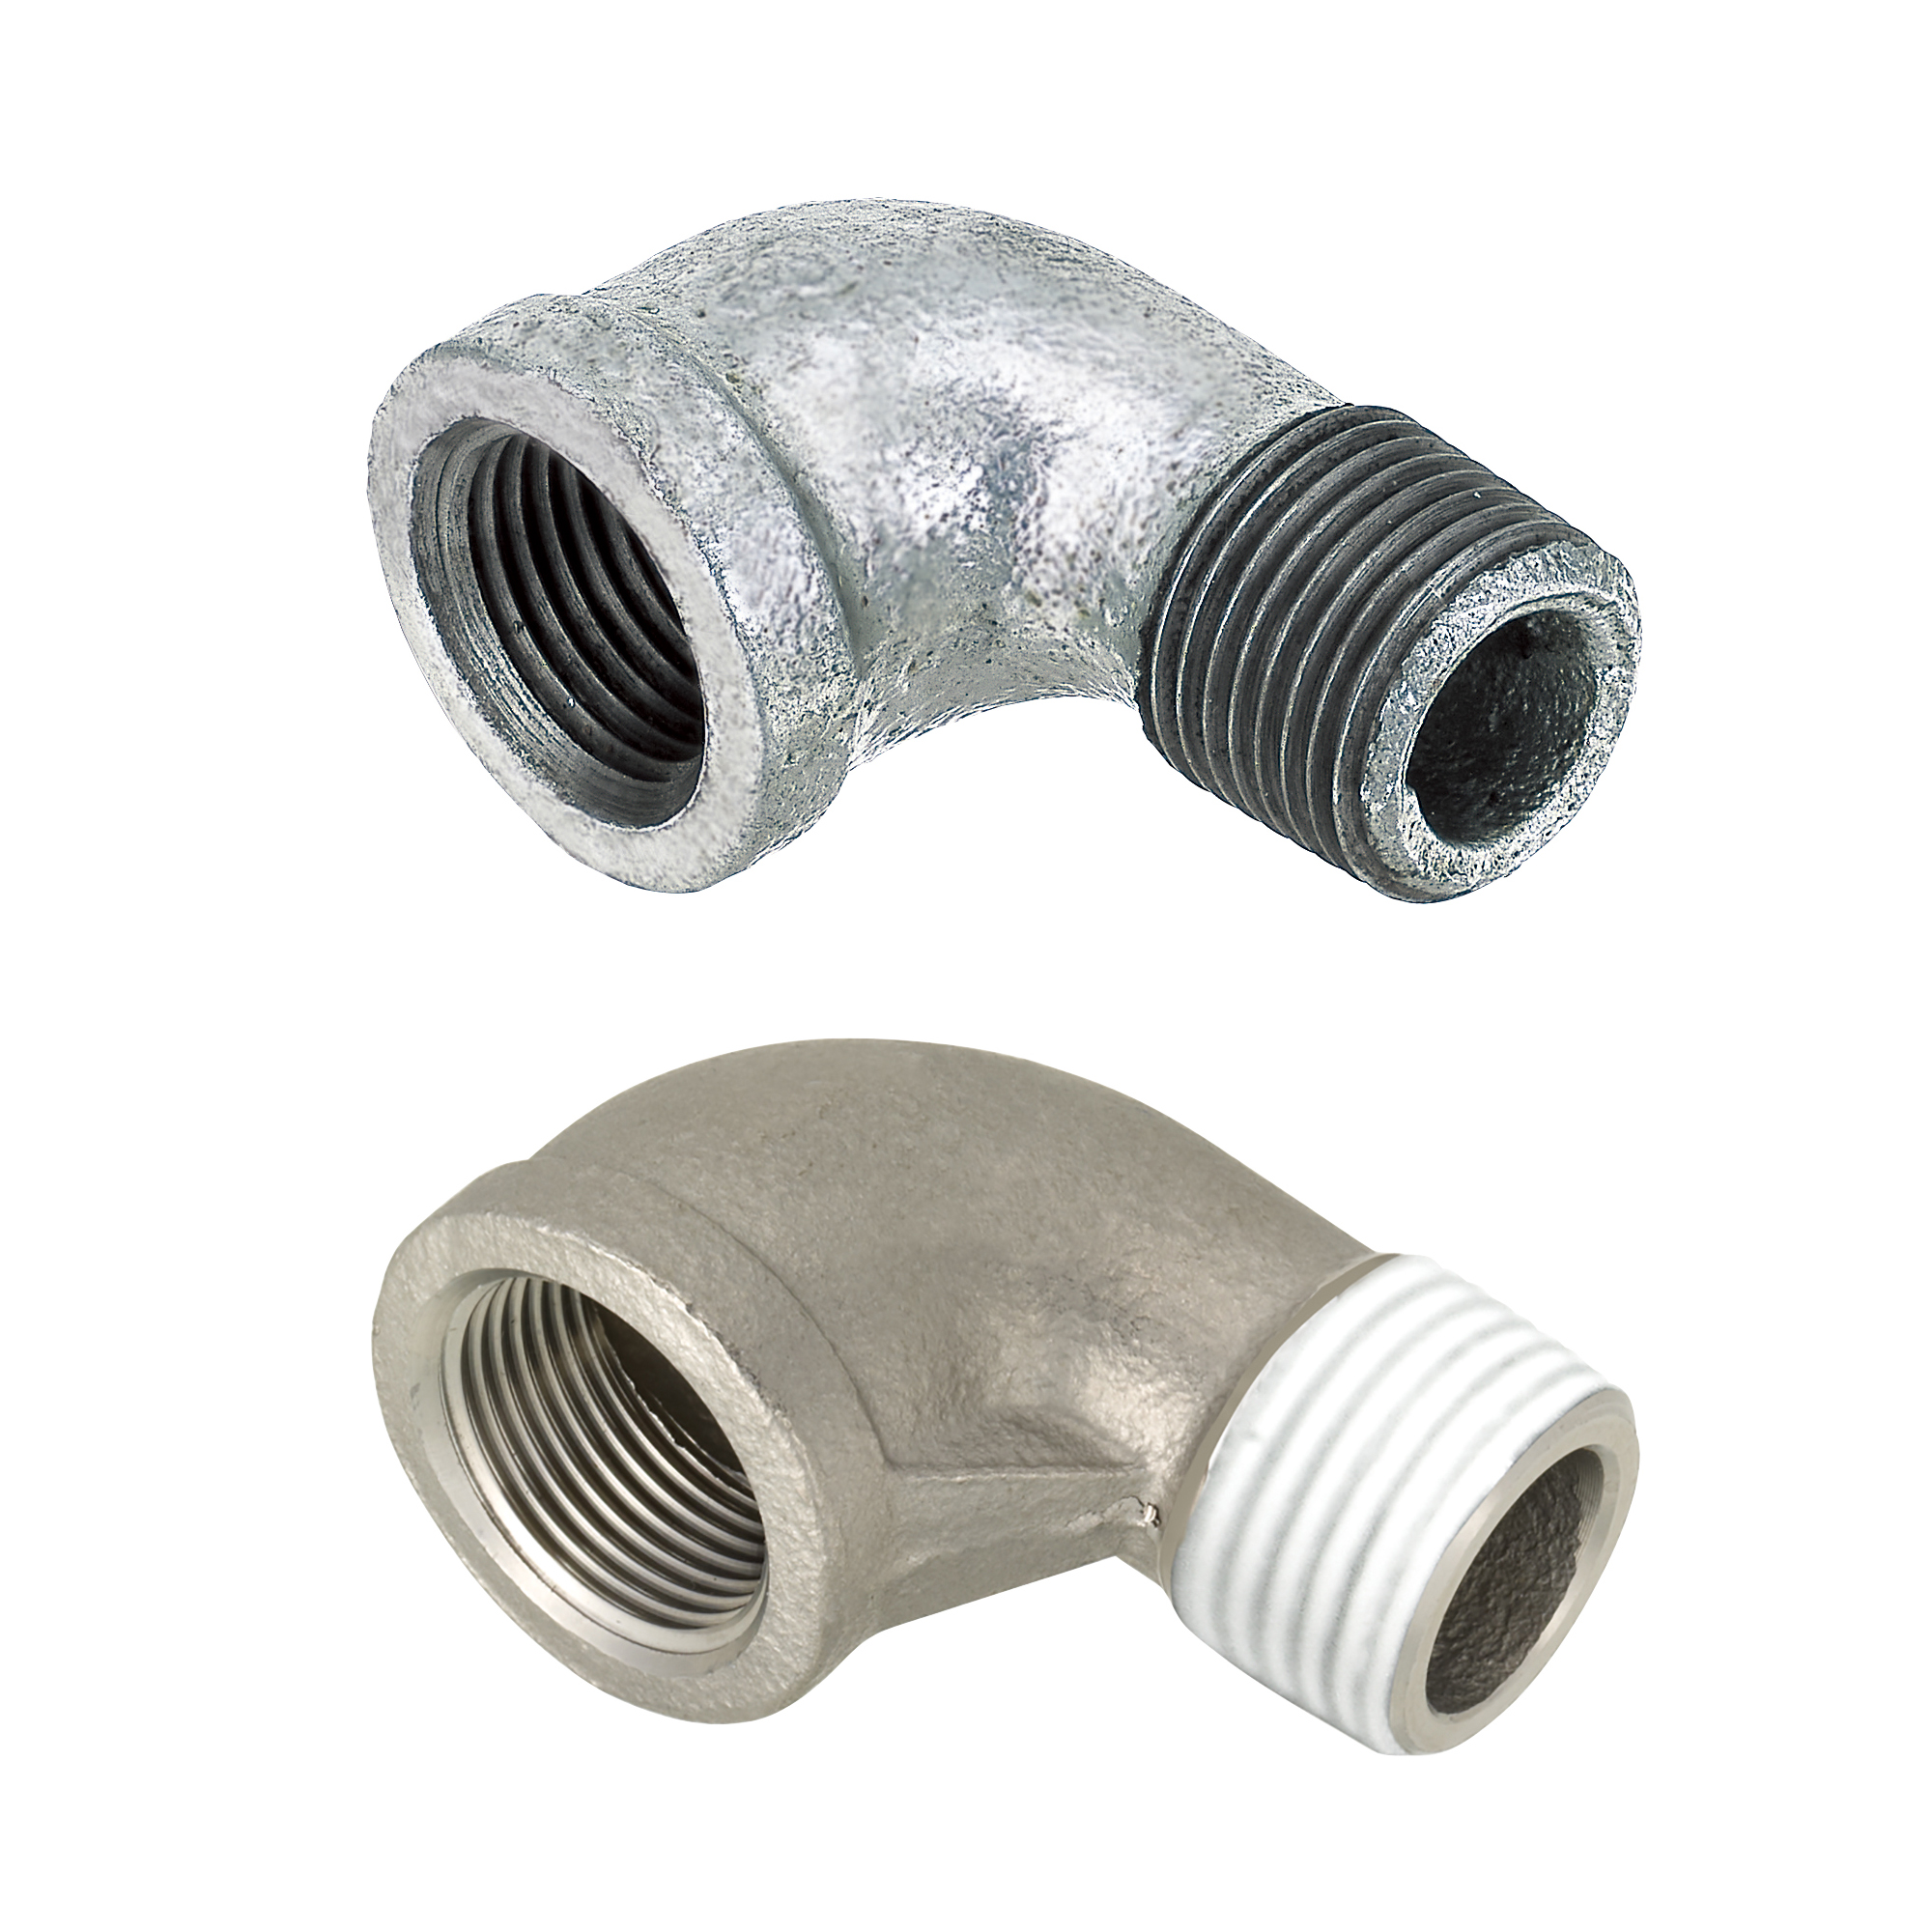 Low Pressure Fittings/90 Deg. Elbow/Threaded and Tapped SUCEL25A